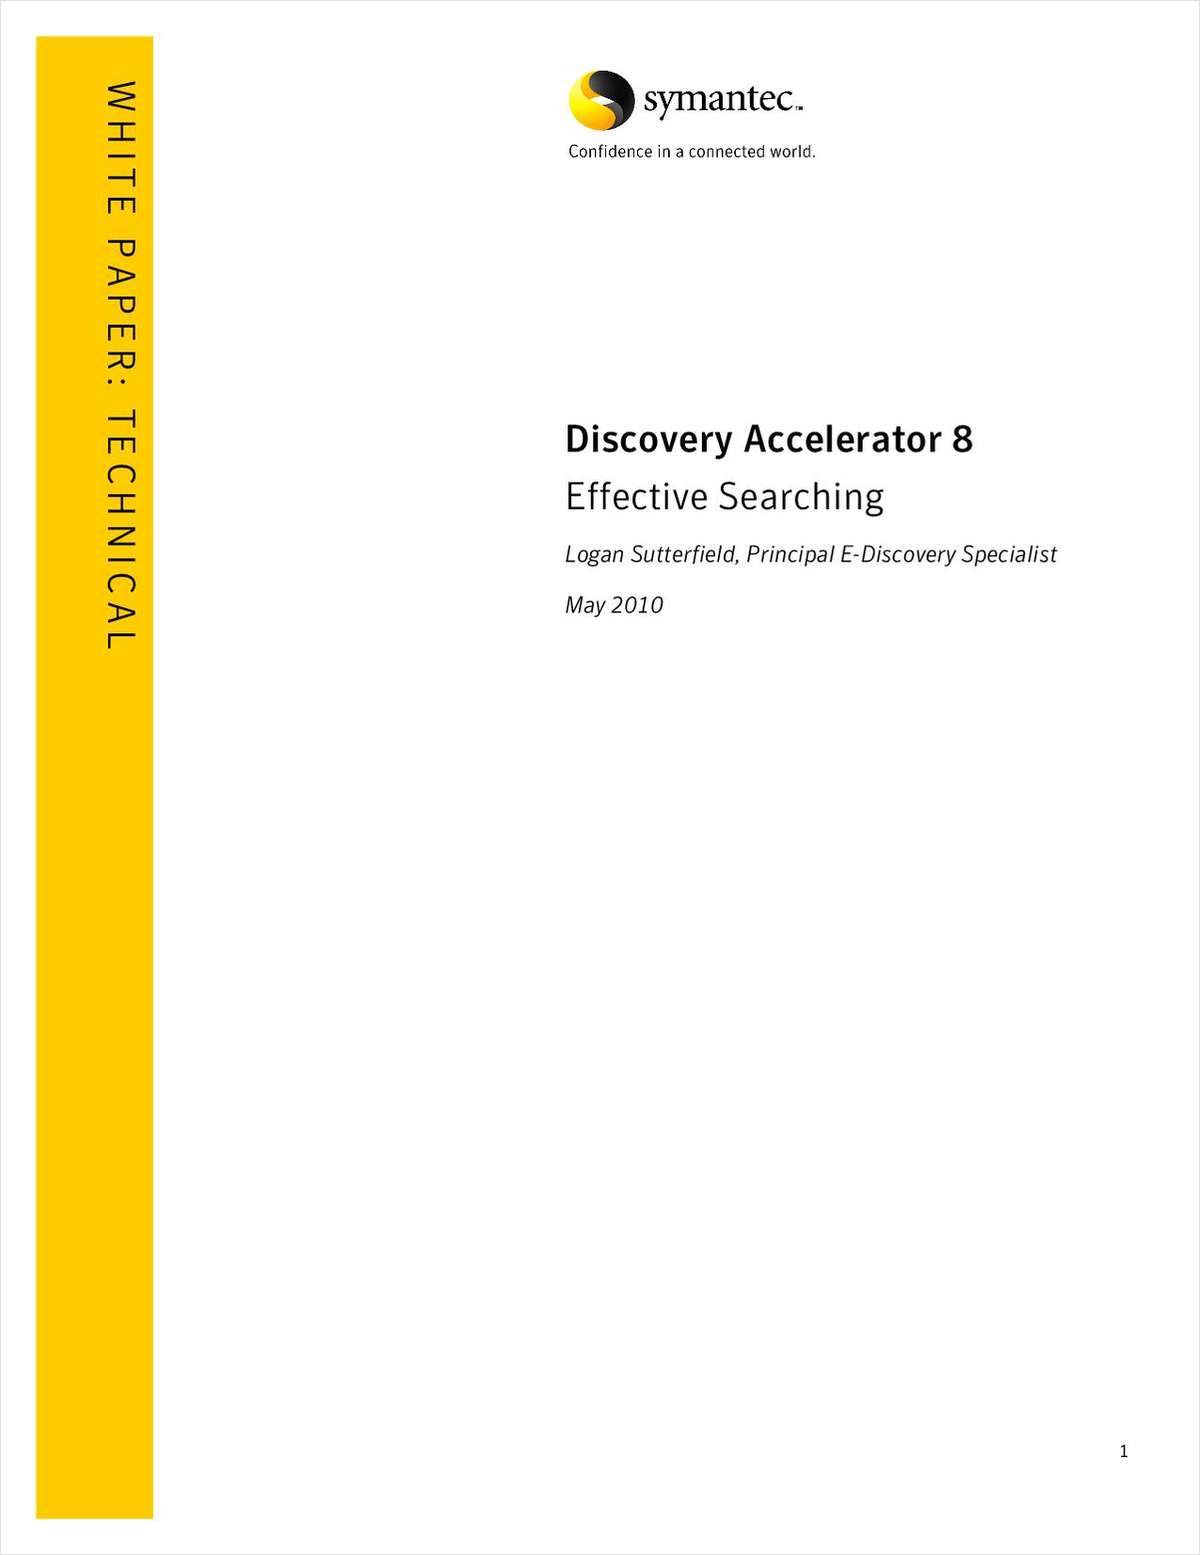 Discovery Accelerator 8 Effective Searching